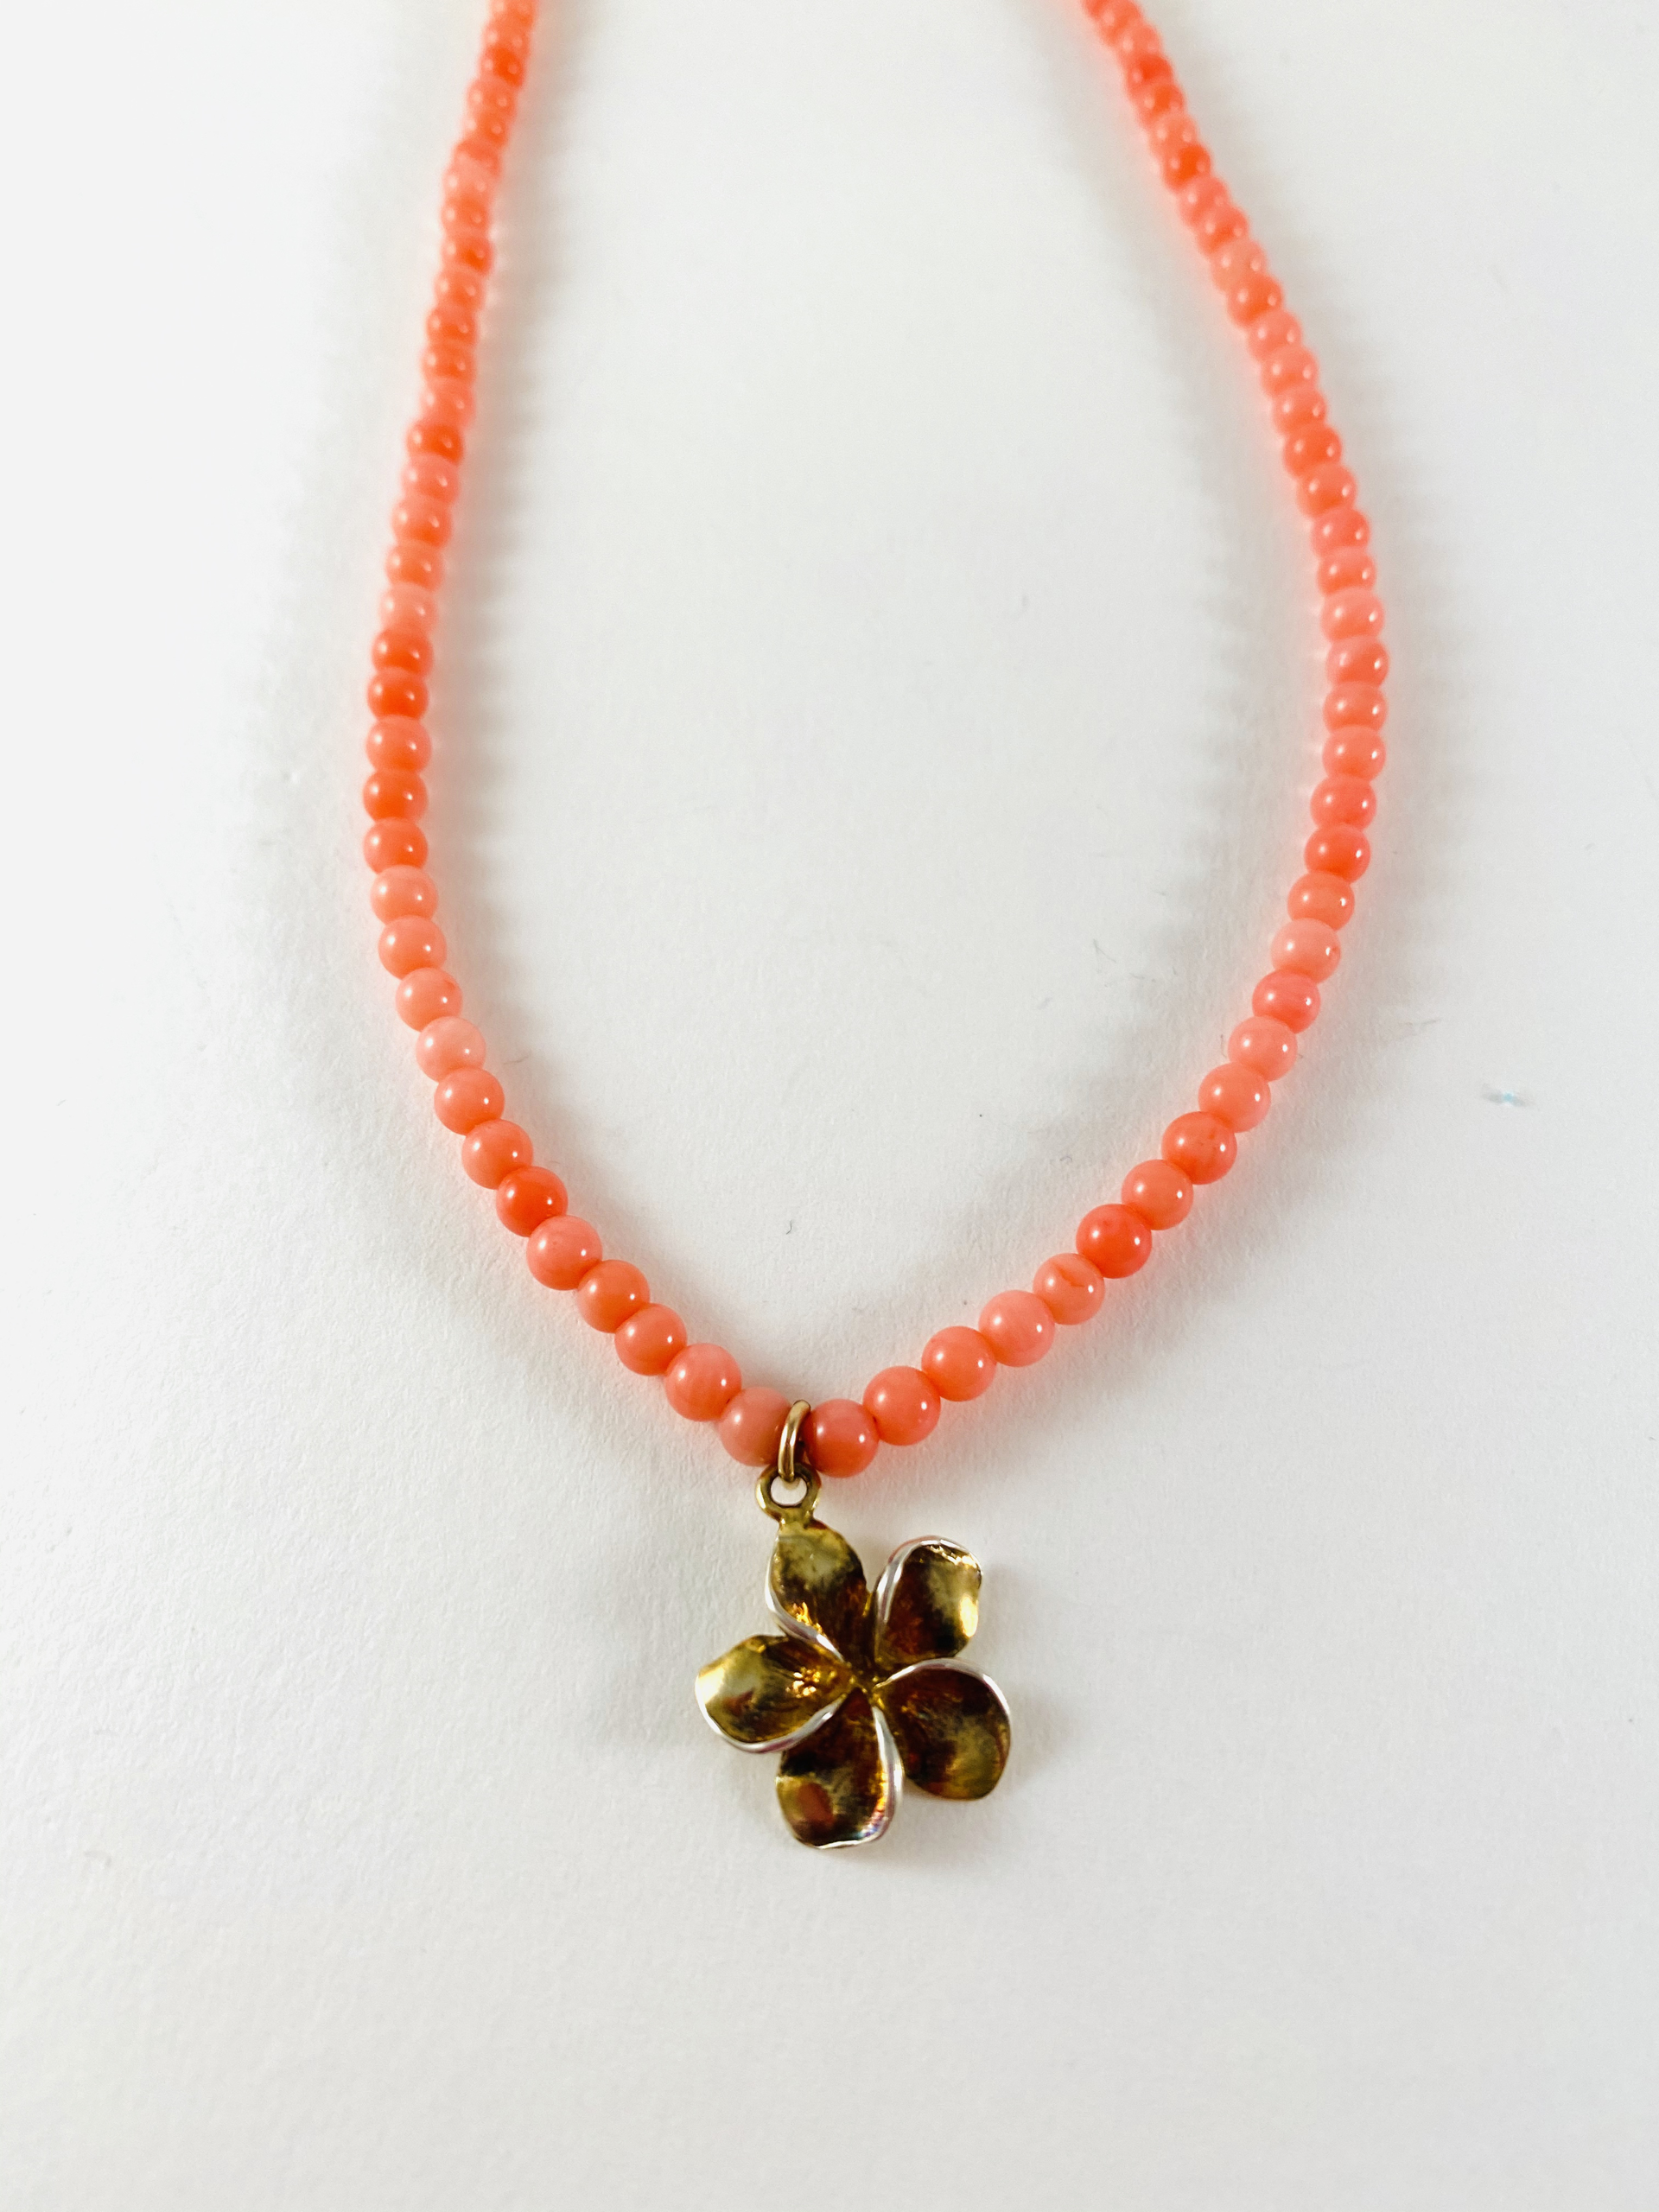 Coral Bead Necklace, vermeil flower charm by Nance Trueworthy